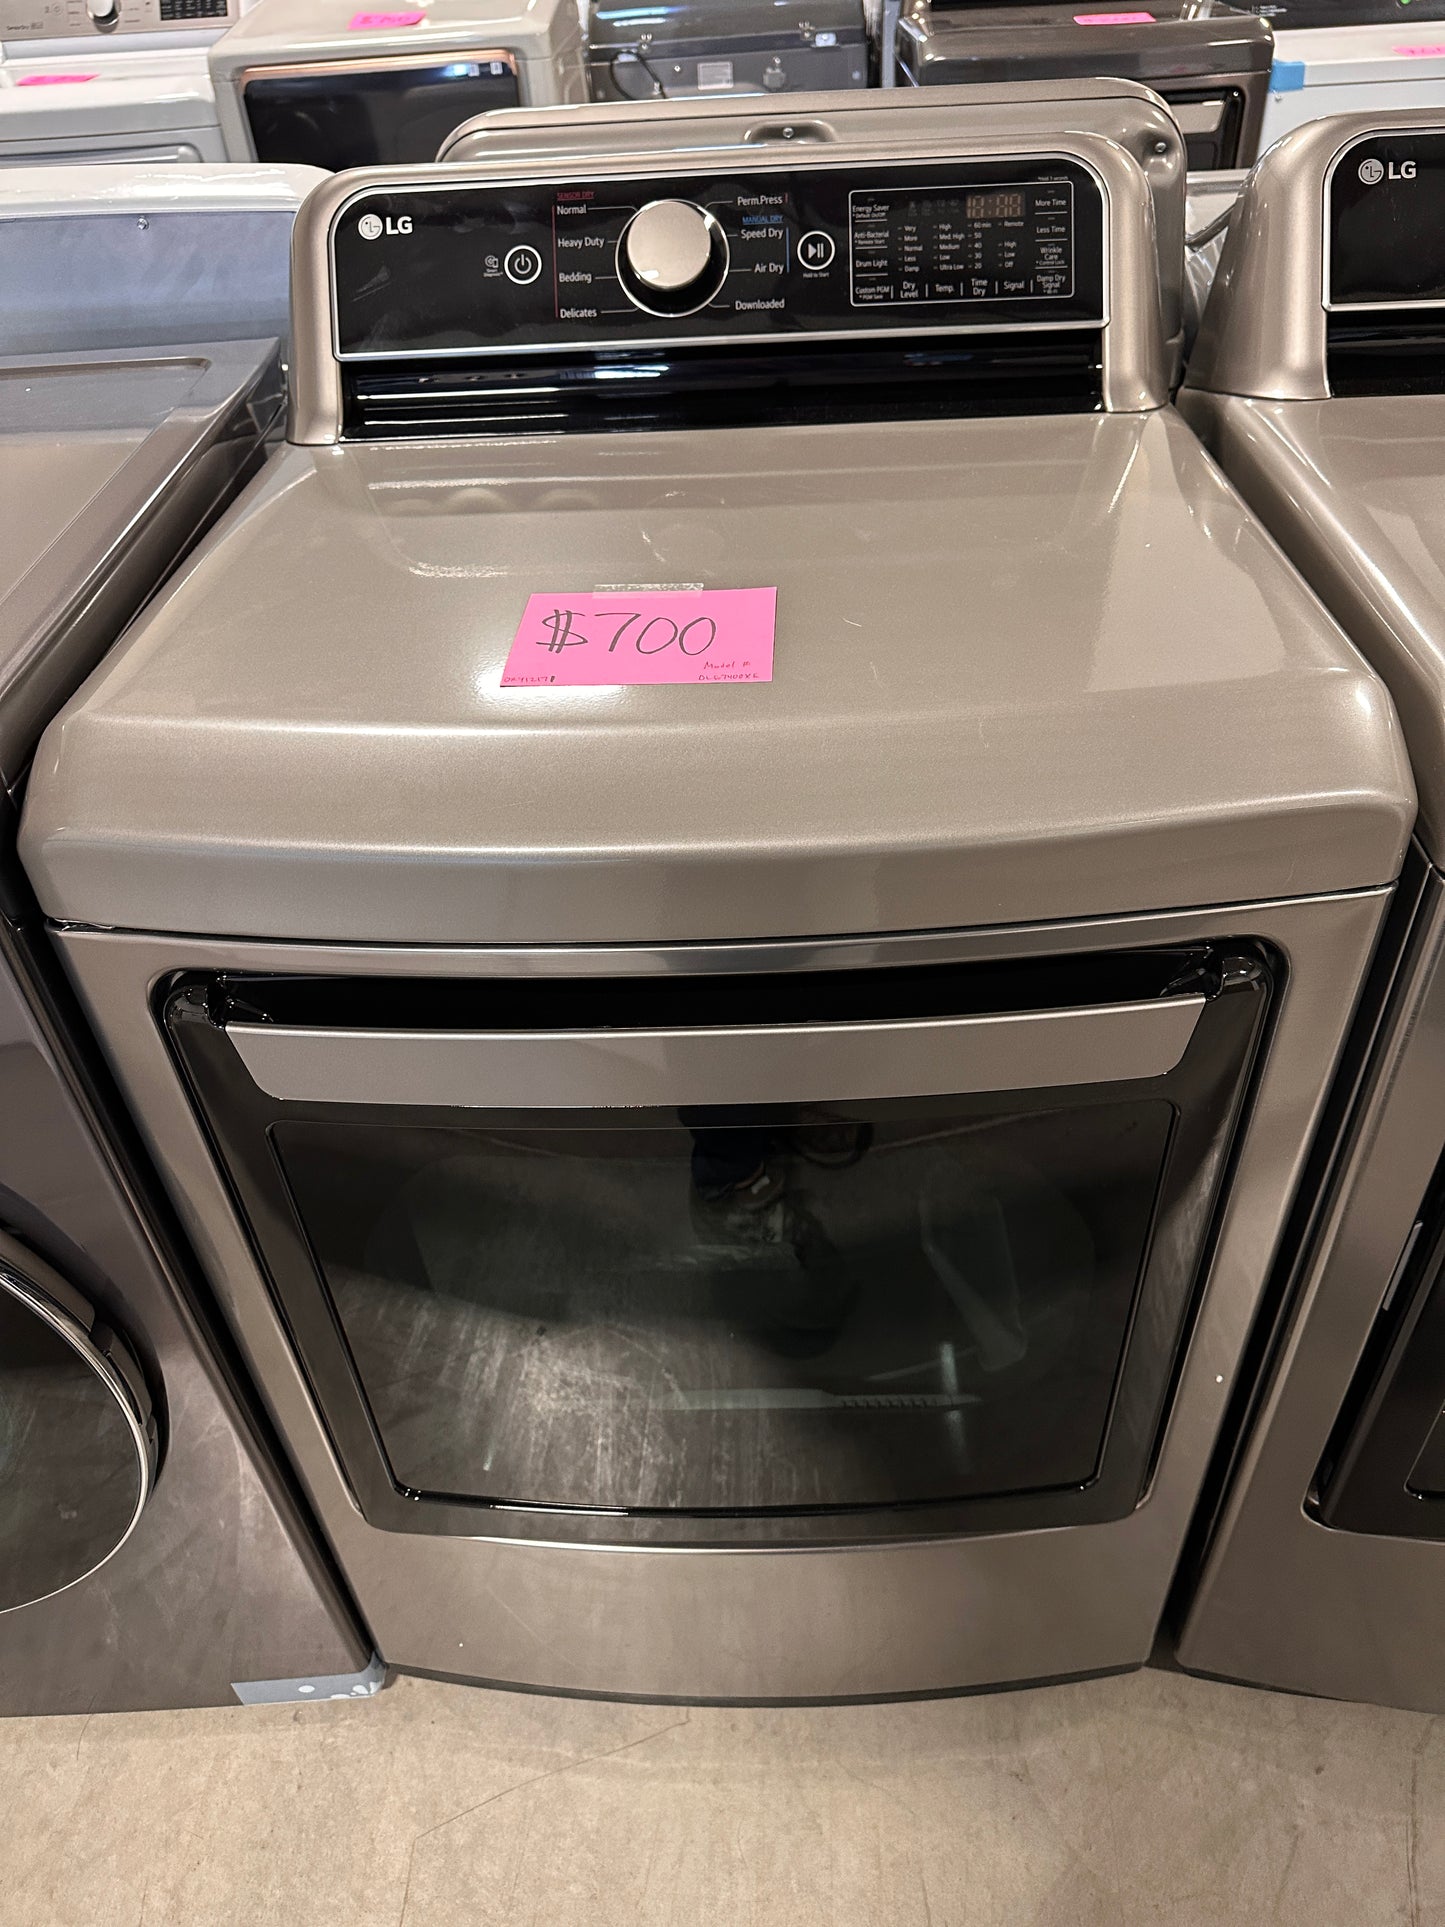 NEW LG 7.3 CU FT ELECTRIC DRYER - DRY12171